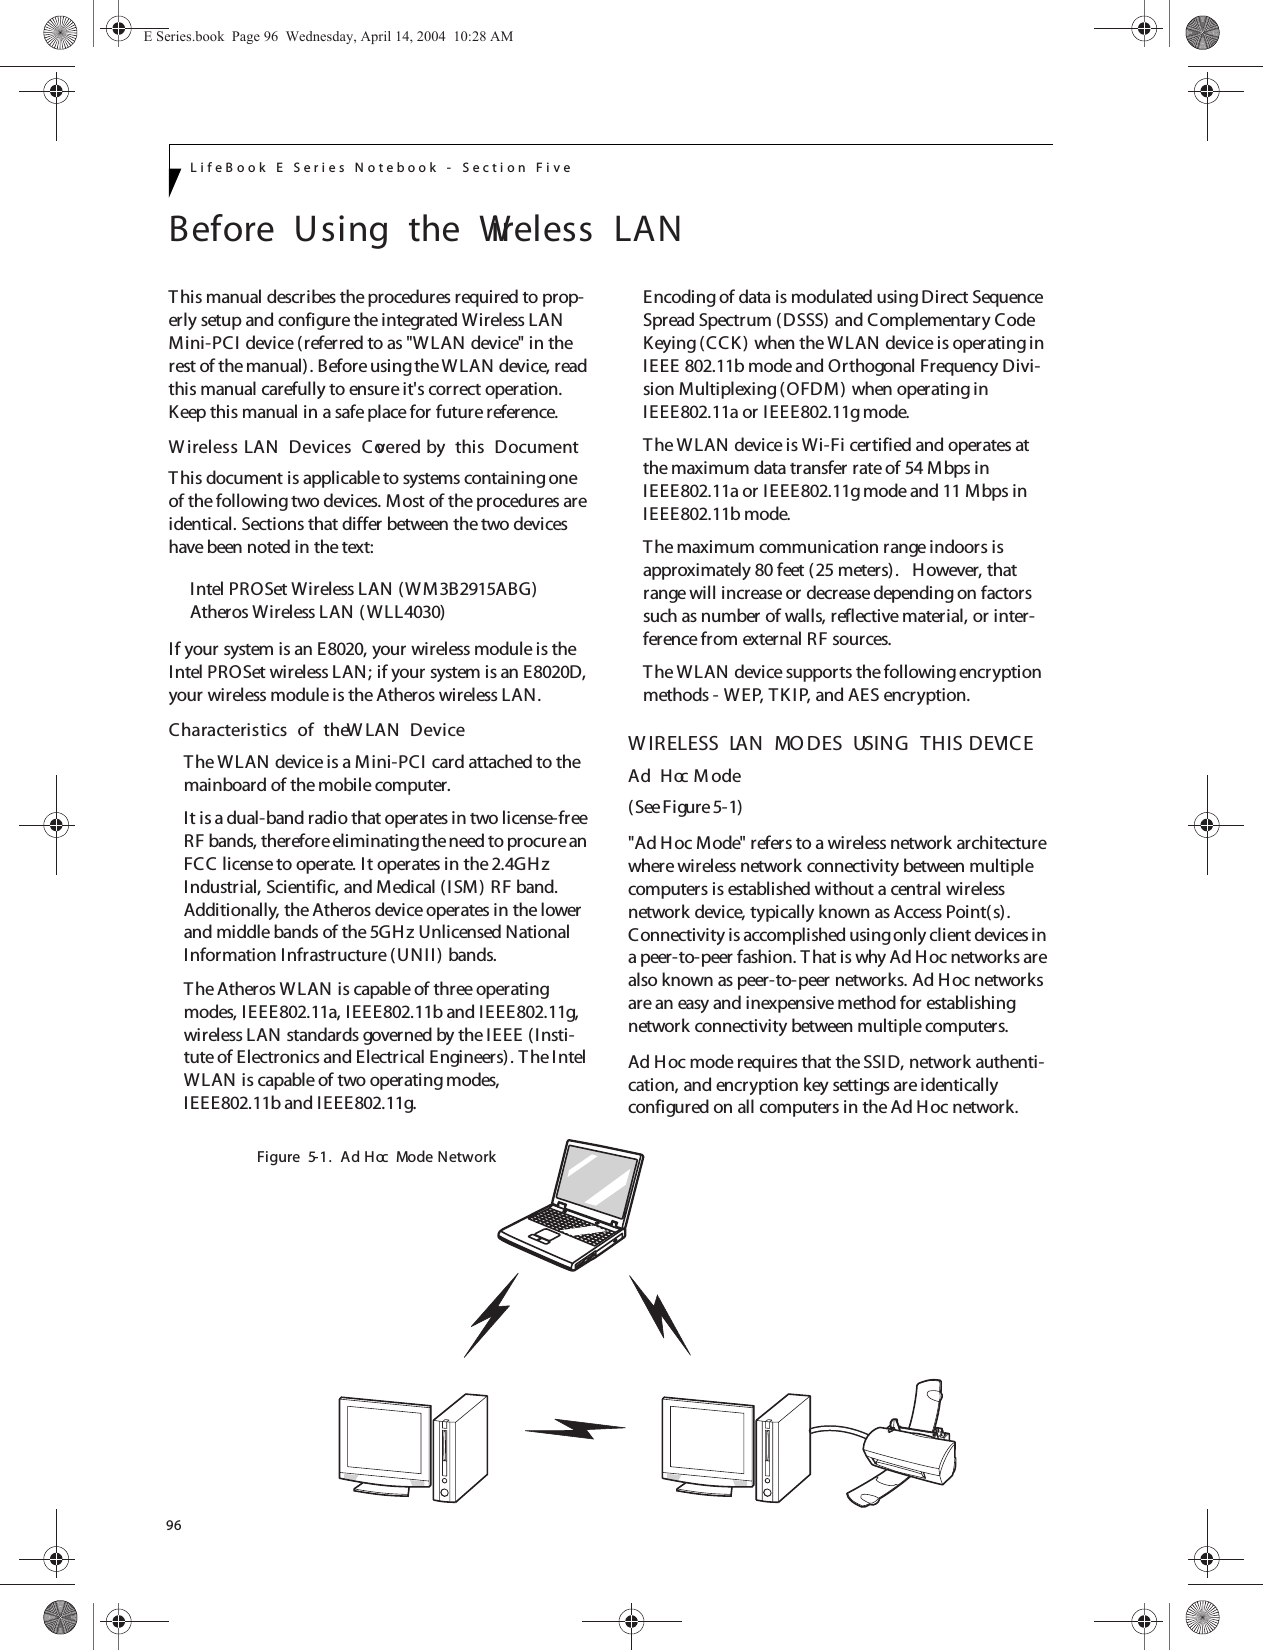 96LifeBook E Series Notebook - Section FiveBefore  Using  the  Wireless  LANThis manual describes the procedures required to prop-erly setup and configure the integrated Wireless LAN Mini-PCI device (referred to as &quot;WLAN device&quot; in the rest of the manual). Before using the WLAN device, read this manual carefully to ensure it&apos;s correct operation. Keep this manual in a safe place for future reference.W ireless LAN  Devices  Covered by  this  DocumentThis document is applicable to systems containing one of the following two devices. Most of the procedures are identical. Sections that differ between the two devices have been noted in the text:Intel PROSet Wireless LAN (WM3B2915ABG)Atheros Wireless LAN (WLL4030)If your system is an E8020, your wireless module is the Intel PROSet wireless LAN; if your system is an E8020D, your wireless module is the Atheros wireless LAN.Characteristics  of  the W LAN  DeviceThe W LAN device is a Mini-PCI card attached to the mainboard of the mobile computer. It is a dual-band radio that operates in two license-free RF bands, therefore eliminating the need to procure an FCC license to operate. It operates in the 2.4GH z Industrial, Scientific, and Medical (ISM) RF band. Additionally, the Atheros device operates in the lower and middle bands of the 5GHz Unlicensed National Information Infrastructure (UNII) bands. The Atheros WLAN is capable of three operating modes, IEEE802.11a, IEEE802.11b and I EEE802.11g, wireless LAN standards governed by the IEEE (Insti-tute of Electronics and Electrical Engineers). T he Intel WLAN is capable of two operating modes, IEEE802.11b and IEEE802.11g.Encoding of data is modulated using Direct Sequence Spread Spectrum (DSSS) and Complementary Code Keying (CCK) when the W LAN device is operating in IEEE 802.11b mode and Orthogonal Frequency Divi-sion Multiplexing (OFDM) when operating in IEEE802.11a or I EEE802.11g mode. The WLAN device is Wi-Fi certified and operates at the maximum data transfer rate of 54 Mbps in IEEE802.11a or IEEE802.11g mode and 11 Mbps in IEEE802.11b mode.The maximum communication range indoors is approximately 80 feet (25 meters).   However, that range will increase or decrease depending on factors such as number of walls, reflective material, or inter-ference from external RF sources.The W LAN device supports the following encryption methods - W EP, TK I P, and AES encryption.W IRELESS  LAN  MO DES  USING  THIS  DEVICEAd  Hoc M ode (See Figure 5-1)&quot;Ad Hoc Mode&quot; refers to a wireless network architecture where wireless network connectivity between multiple computers is established without a central wireless network device, typically known as Access Point(s). Connectivity is accomplished using only client devices in a peer-to-peer fashion. That is why Ad Hoc networks are also known as peer-to-peer networks. Ad Hoc networks are an easy and inexpensive method for establishing network connectivity between multiple computers.Ad Hoc mode requires that the SSID, network authenti-cation, and encryption key settings are identically configured on all computers in the Ad Hoc network. Figure  5-1.  Ad  Hoc  Mode NetworkE Series.book  Page 96  Wednesday, April 14, 2004  10:28 AM